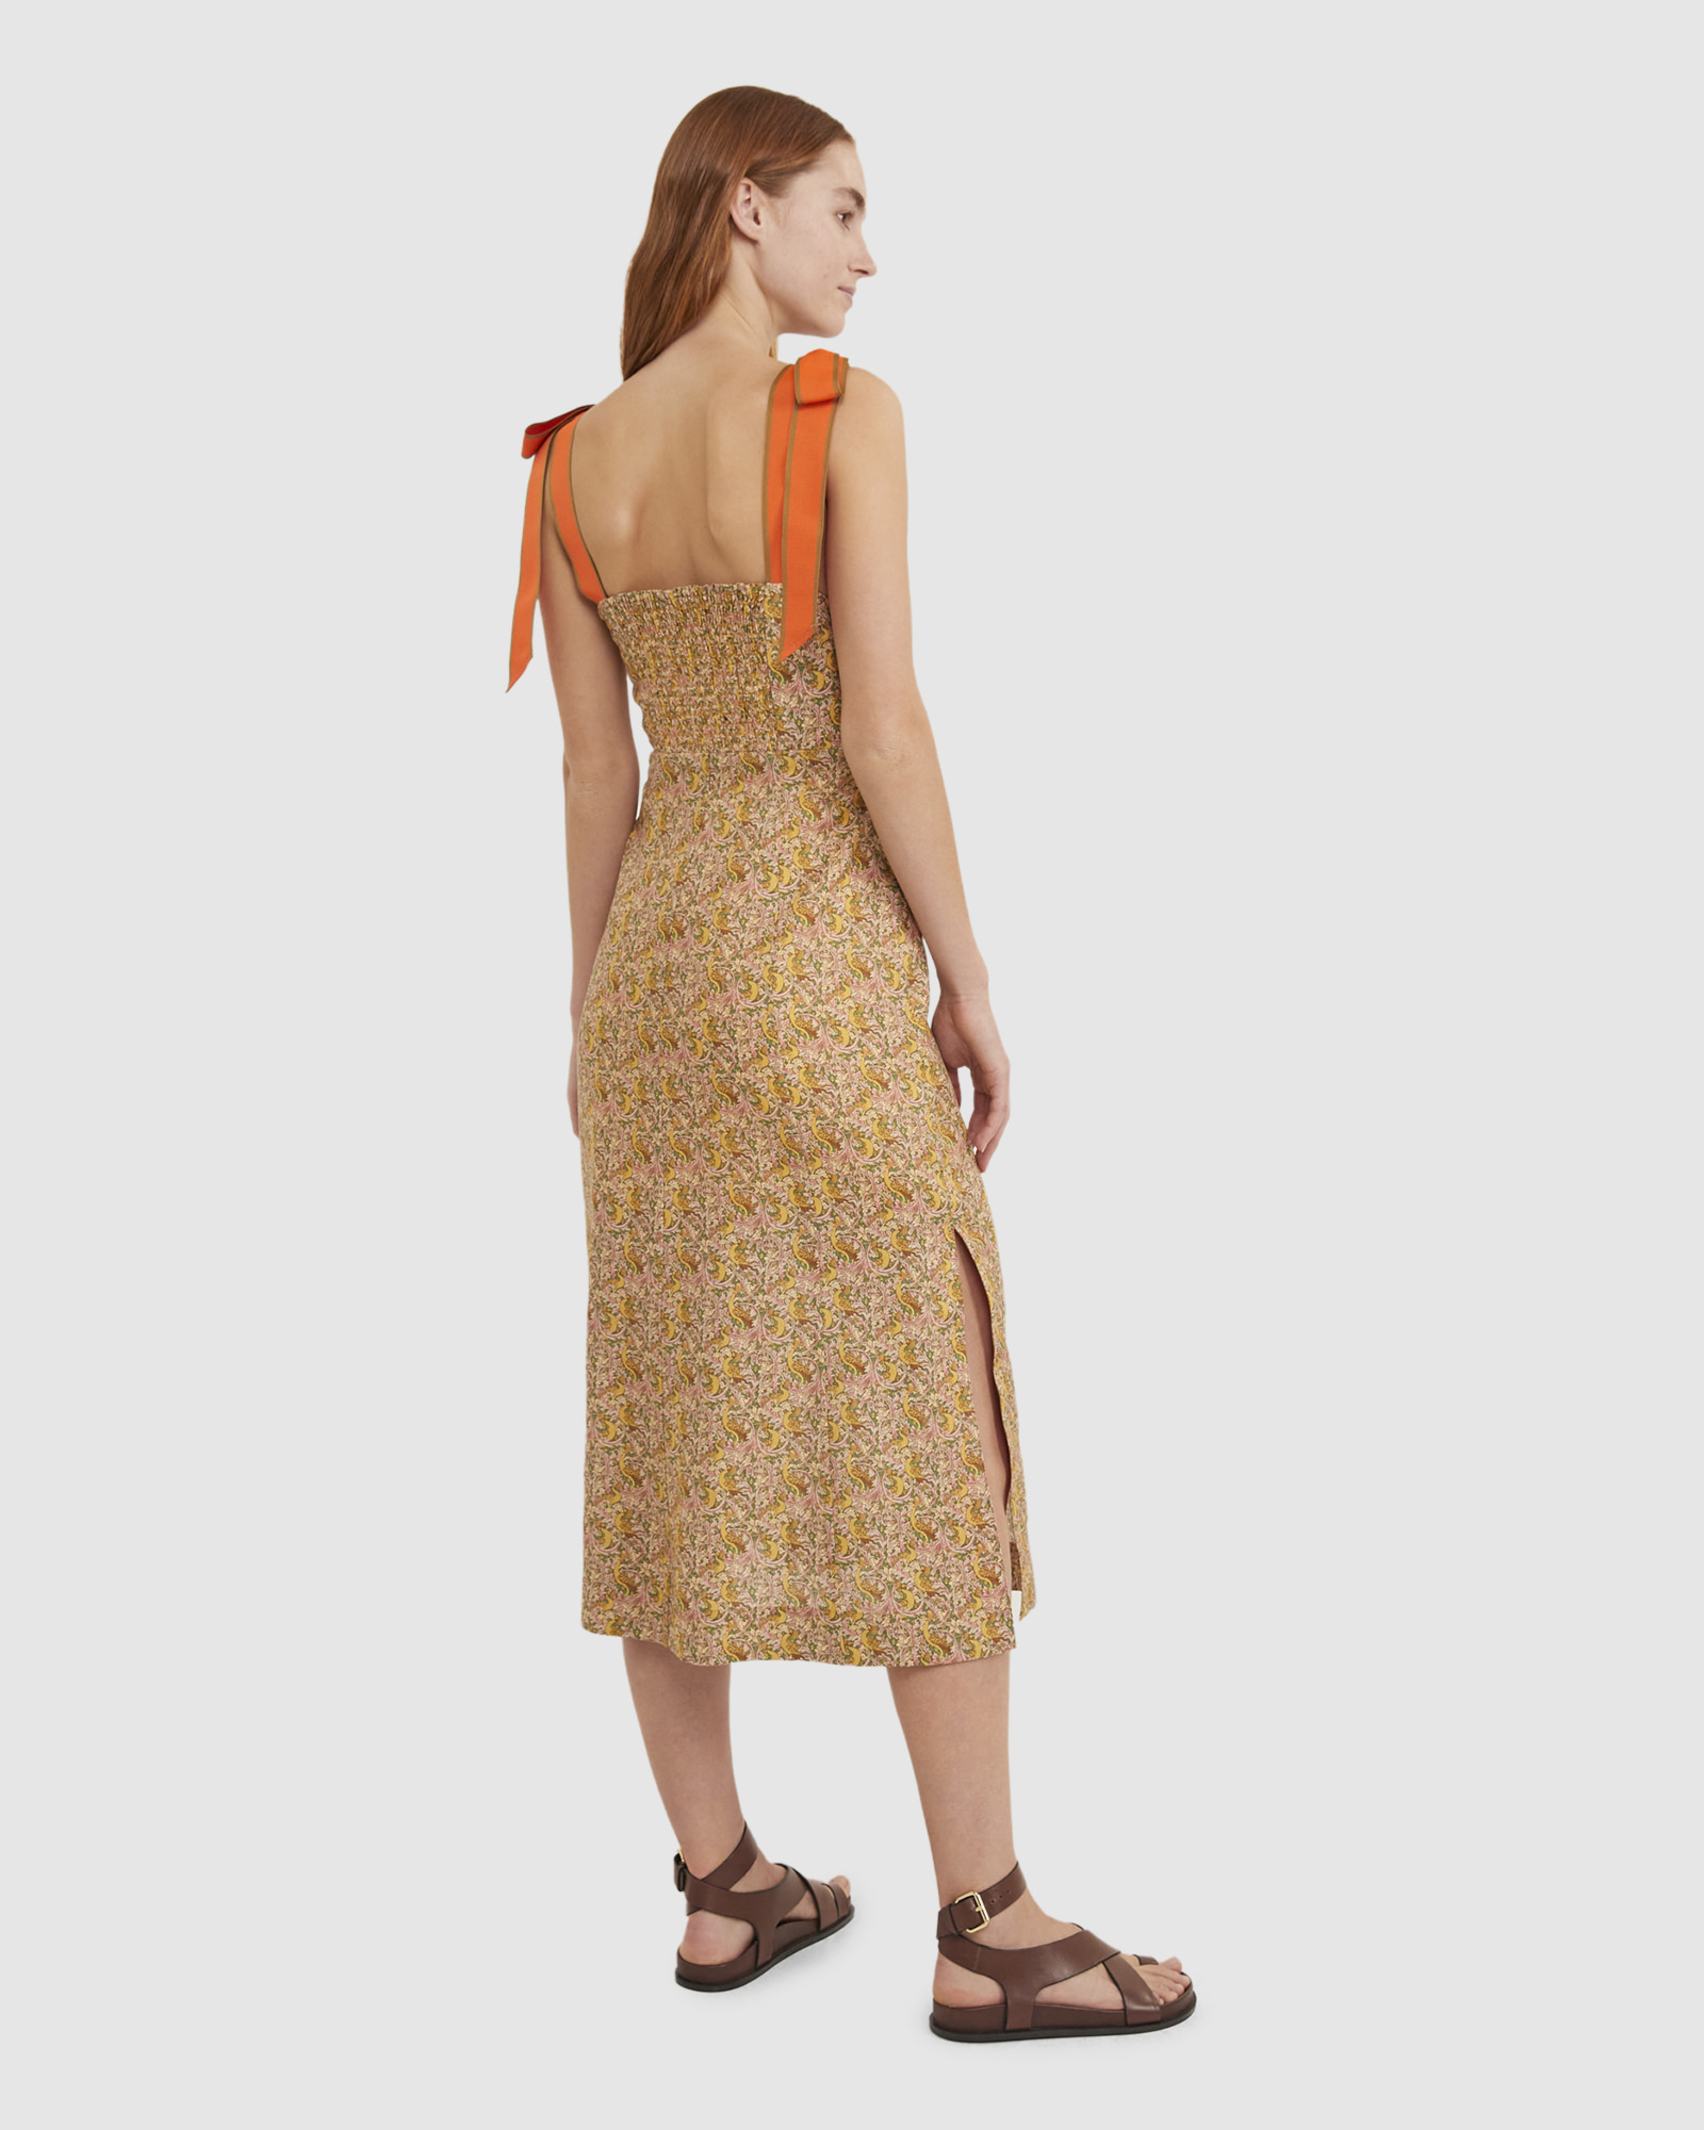 Eden Liberty Dress in CHARTREUSE